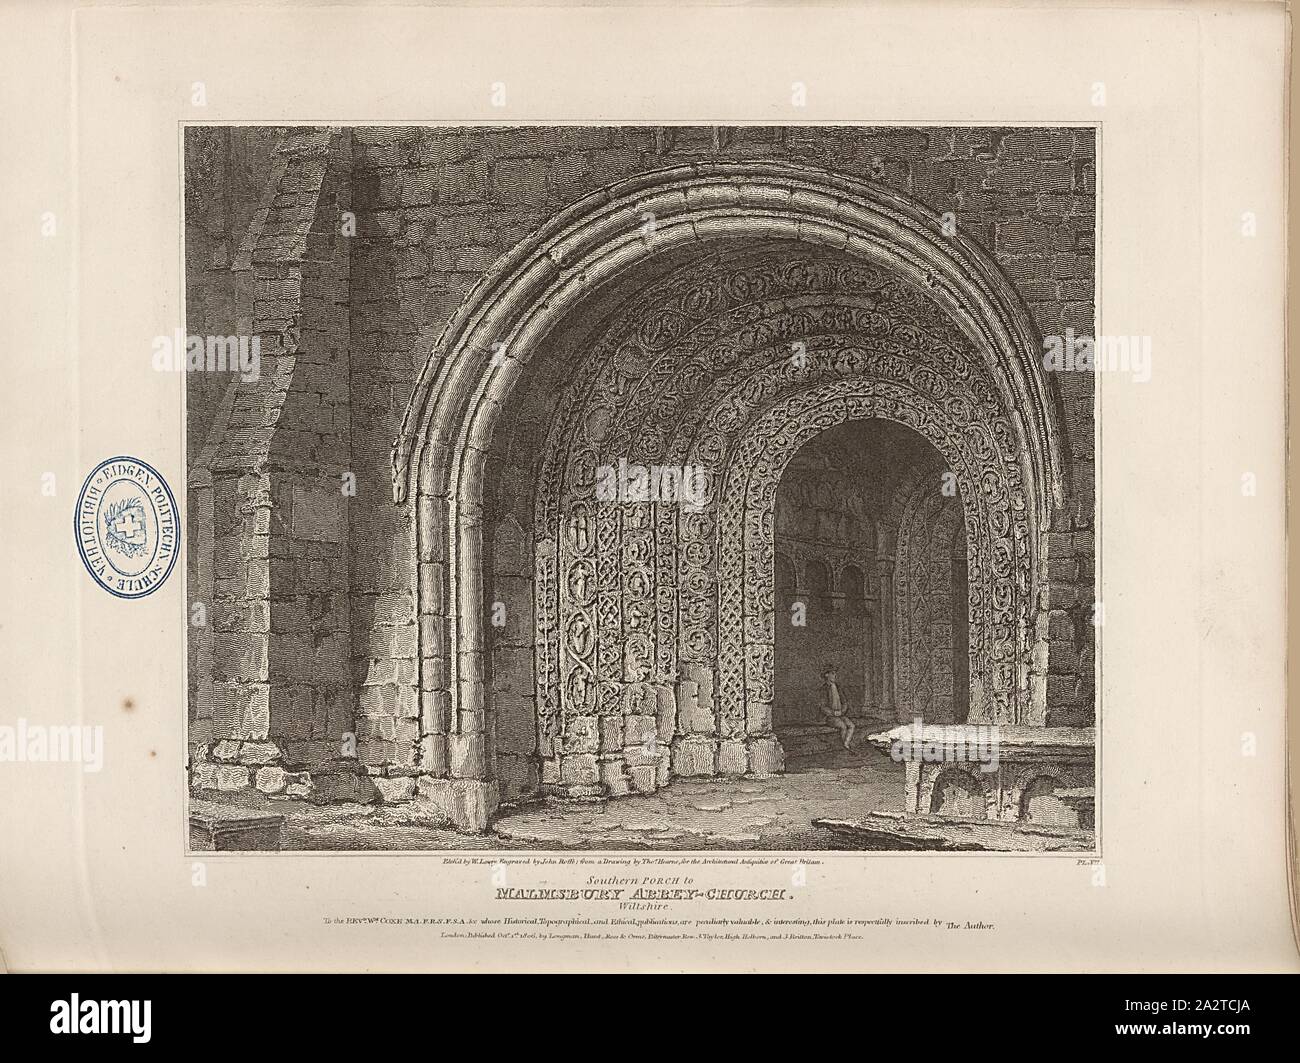 Southern Porch to Malmesbury Abbey-Church, Wiltshire, Malmsbury Abbey Church, signed: Etch'd by W. Lowry, engraved by John Roffe, from a Drawing by Tho., Hearne, Fig. 53, Pl. VII, after p. 12, Hearne, Thomas (Drawing); Lowry, Wilson (Etching); Roffe, John (engr.), 1806, John Britton: The architectural antiquities of Great Britain: represented and illustrated in a series of views, elevations, plans, sections and details of various ancient English edifices: with historical and descriptive accounts of each. Bd. 1. London: J. Taylor, 1807-1826 Stock Photo